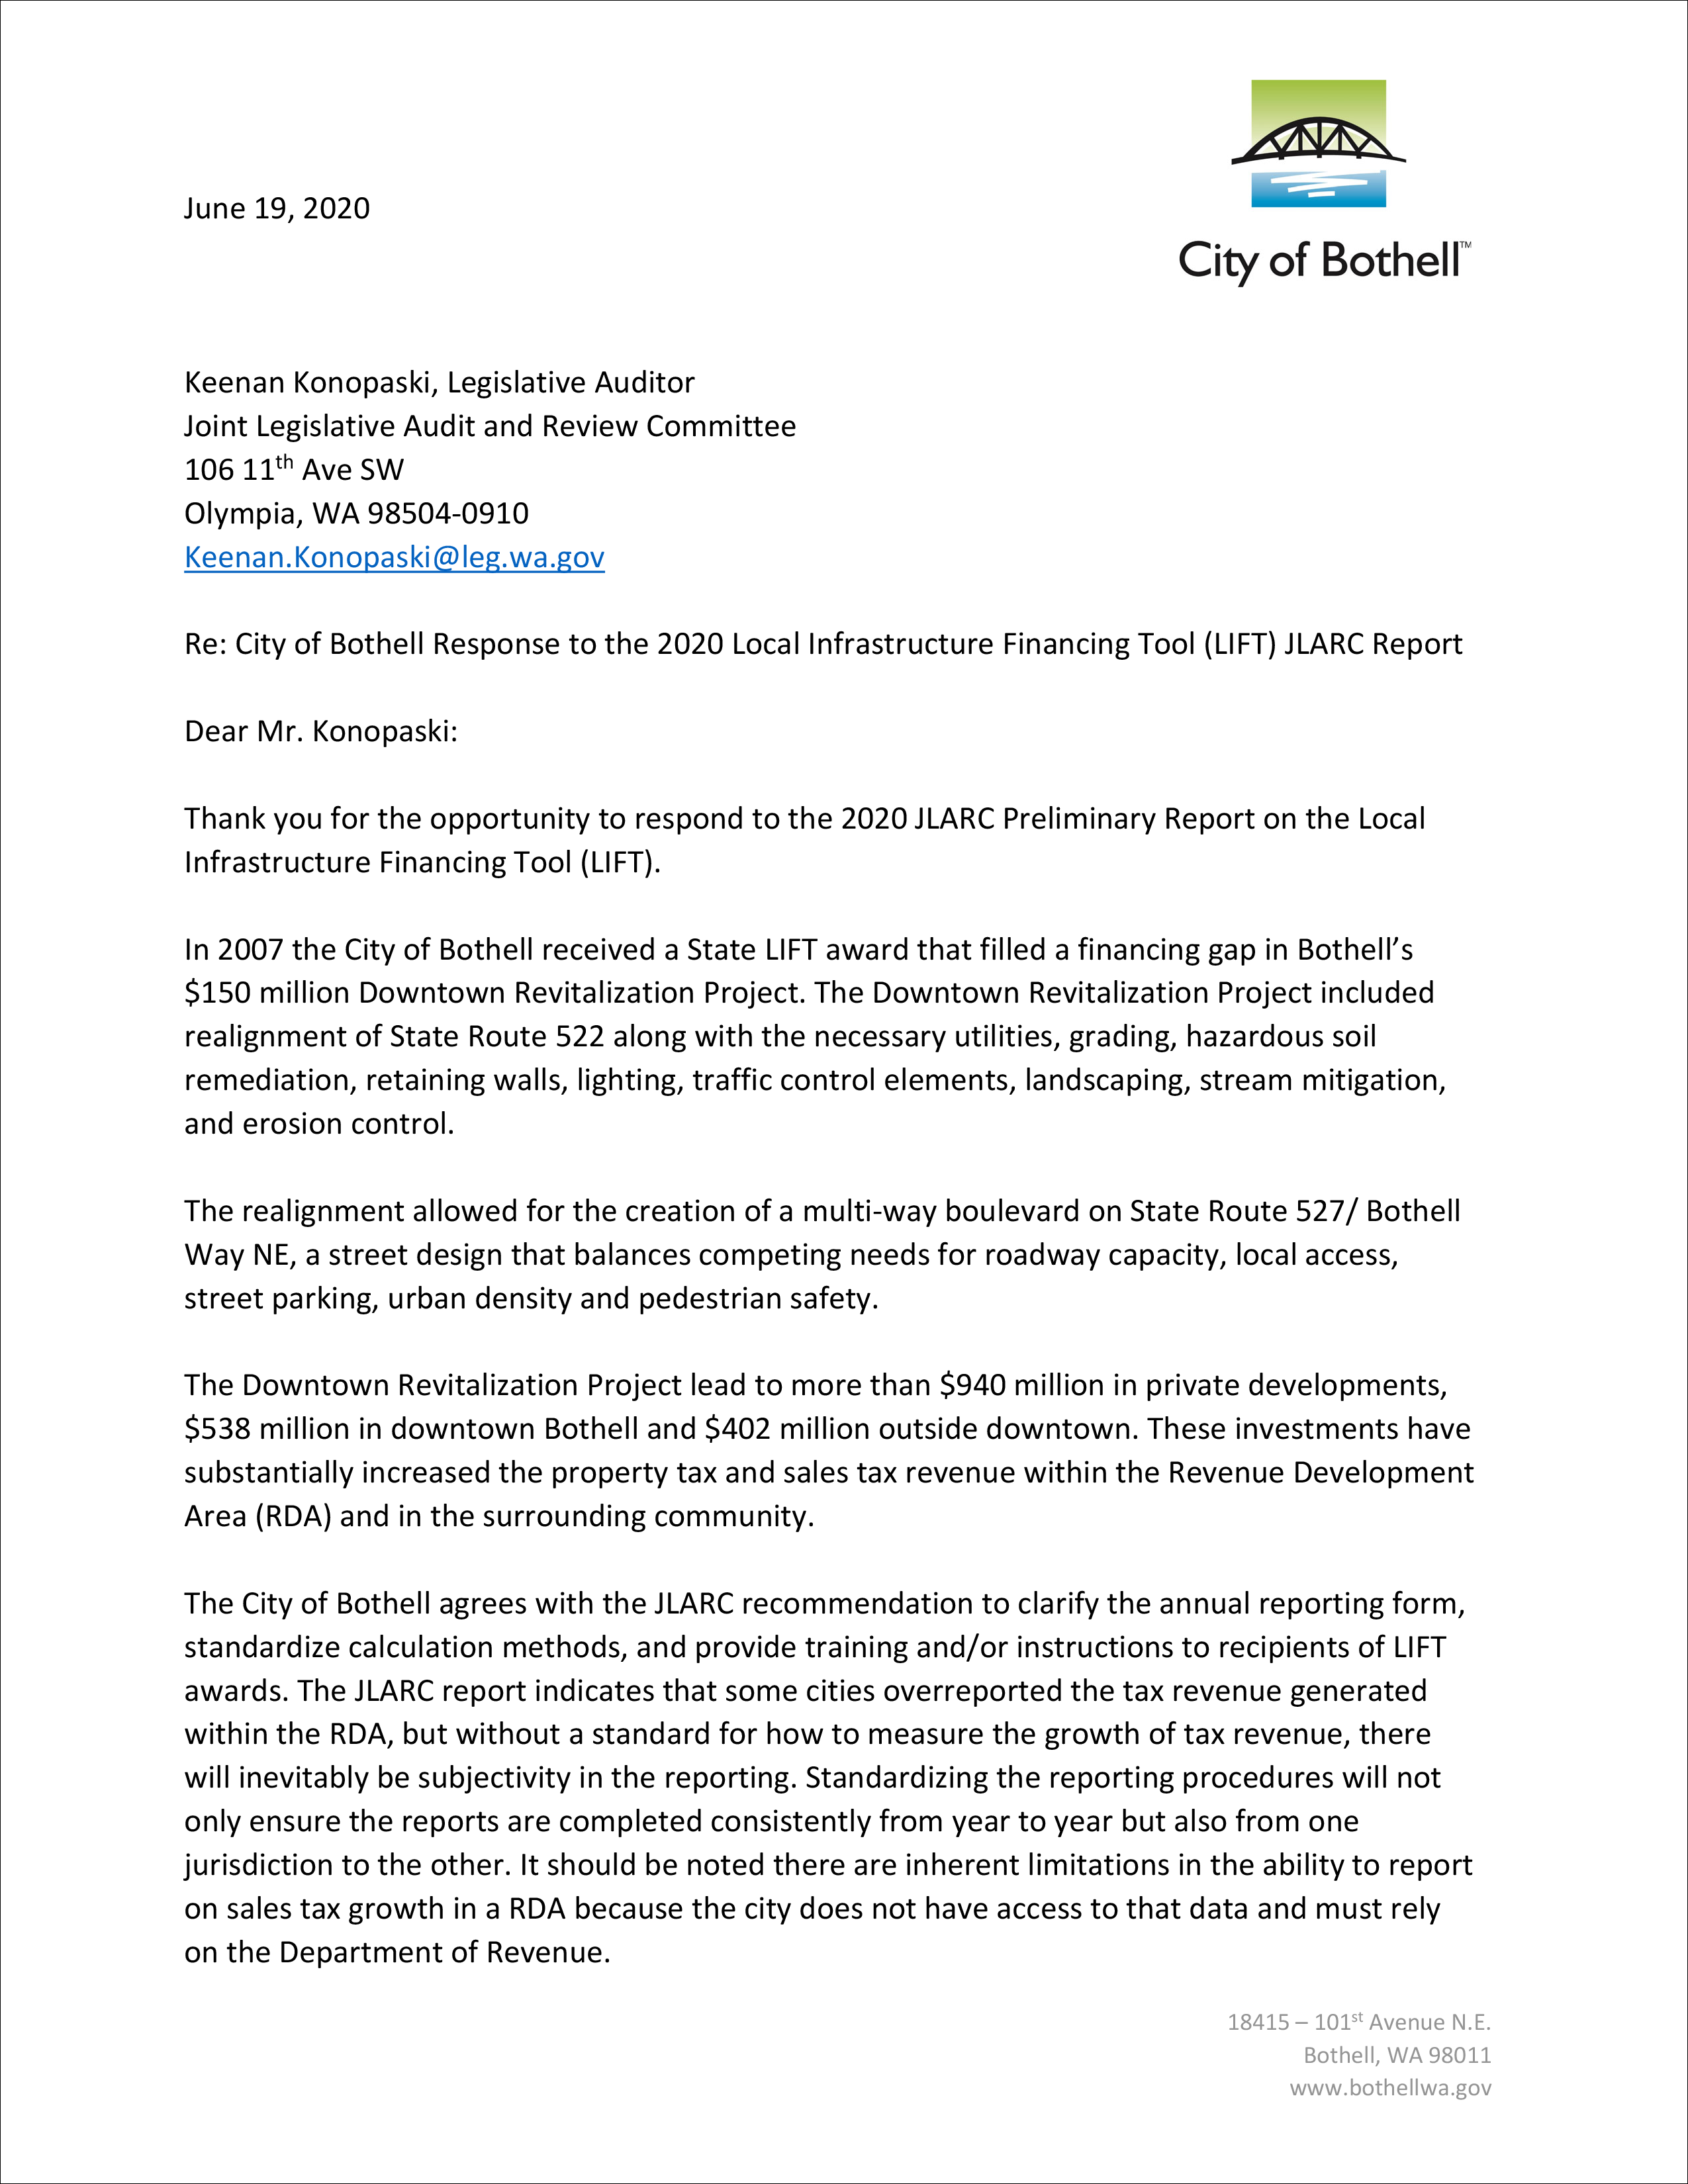 Page one of the City of Bothell's response